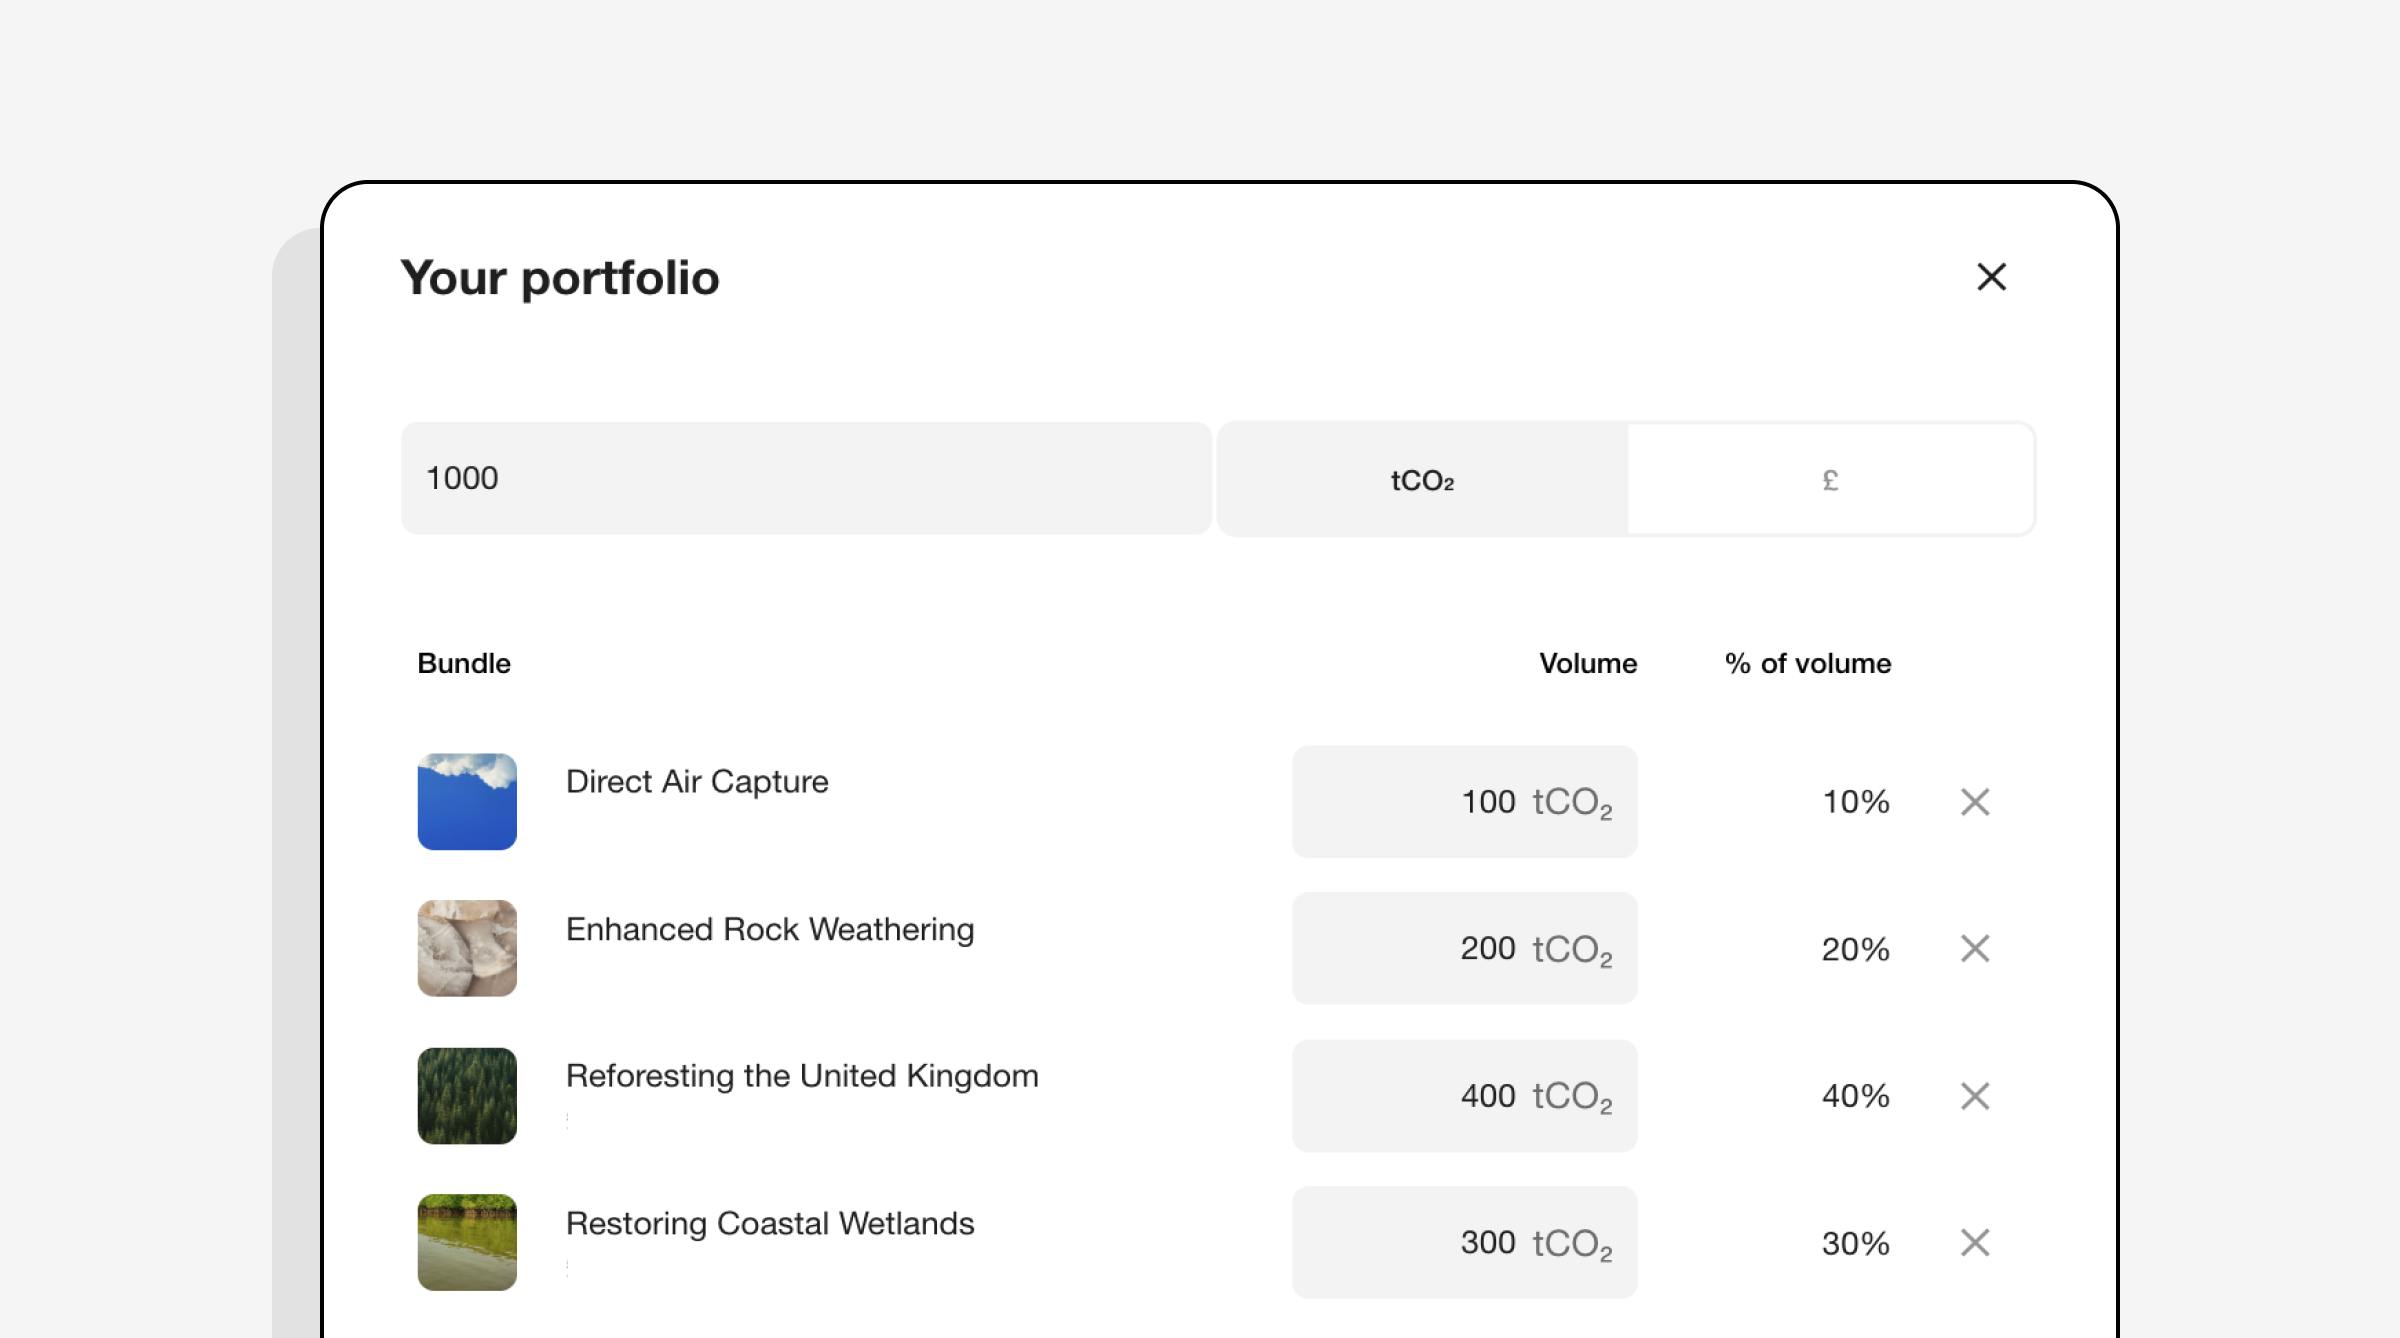 'Your portfolio' - screenshot showing the process of building a portfolio in the Lune dashboard. This example shows a portfolio of 10% direct air capture, 20% enhanced rock weathering, 40% reforestation, and 30% mangrove restoration